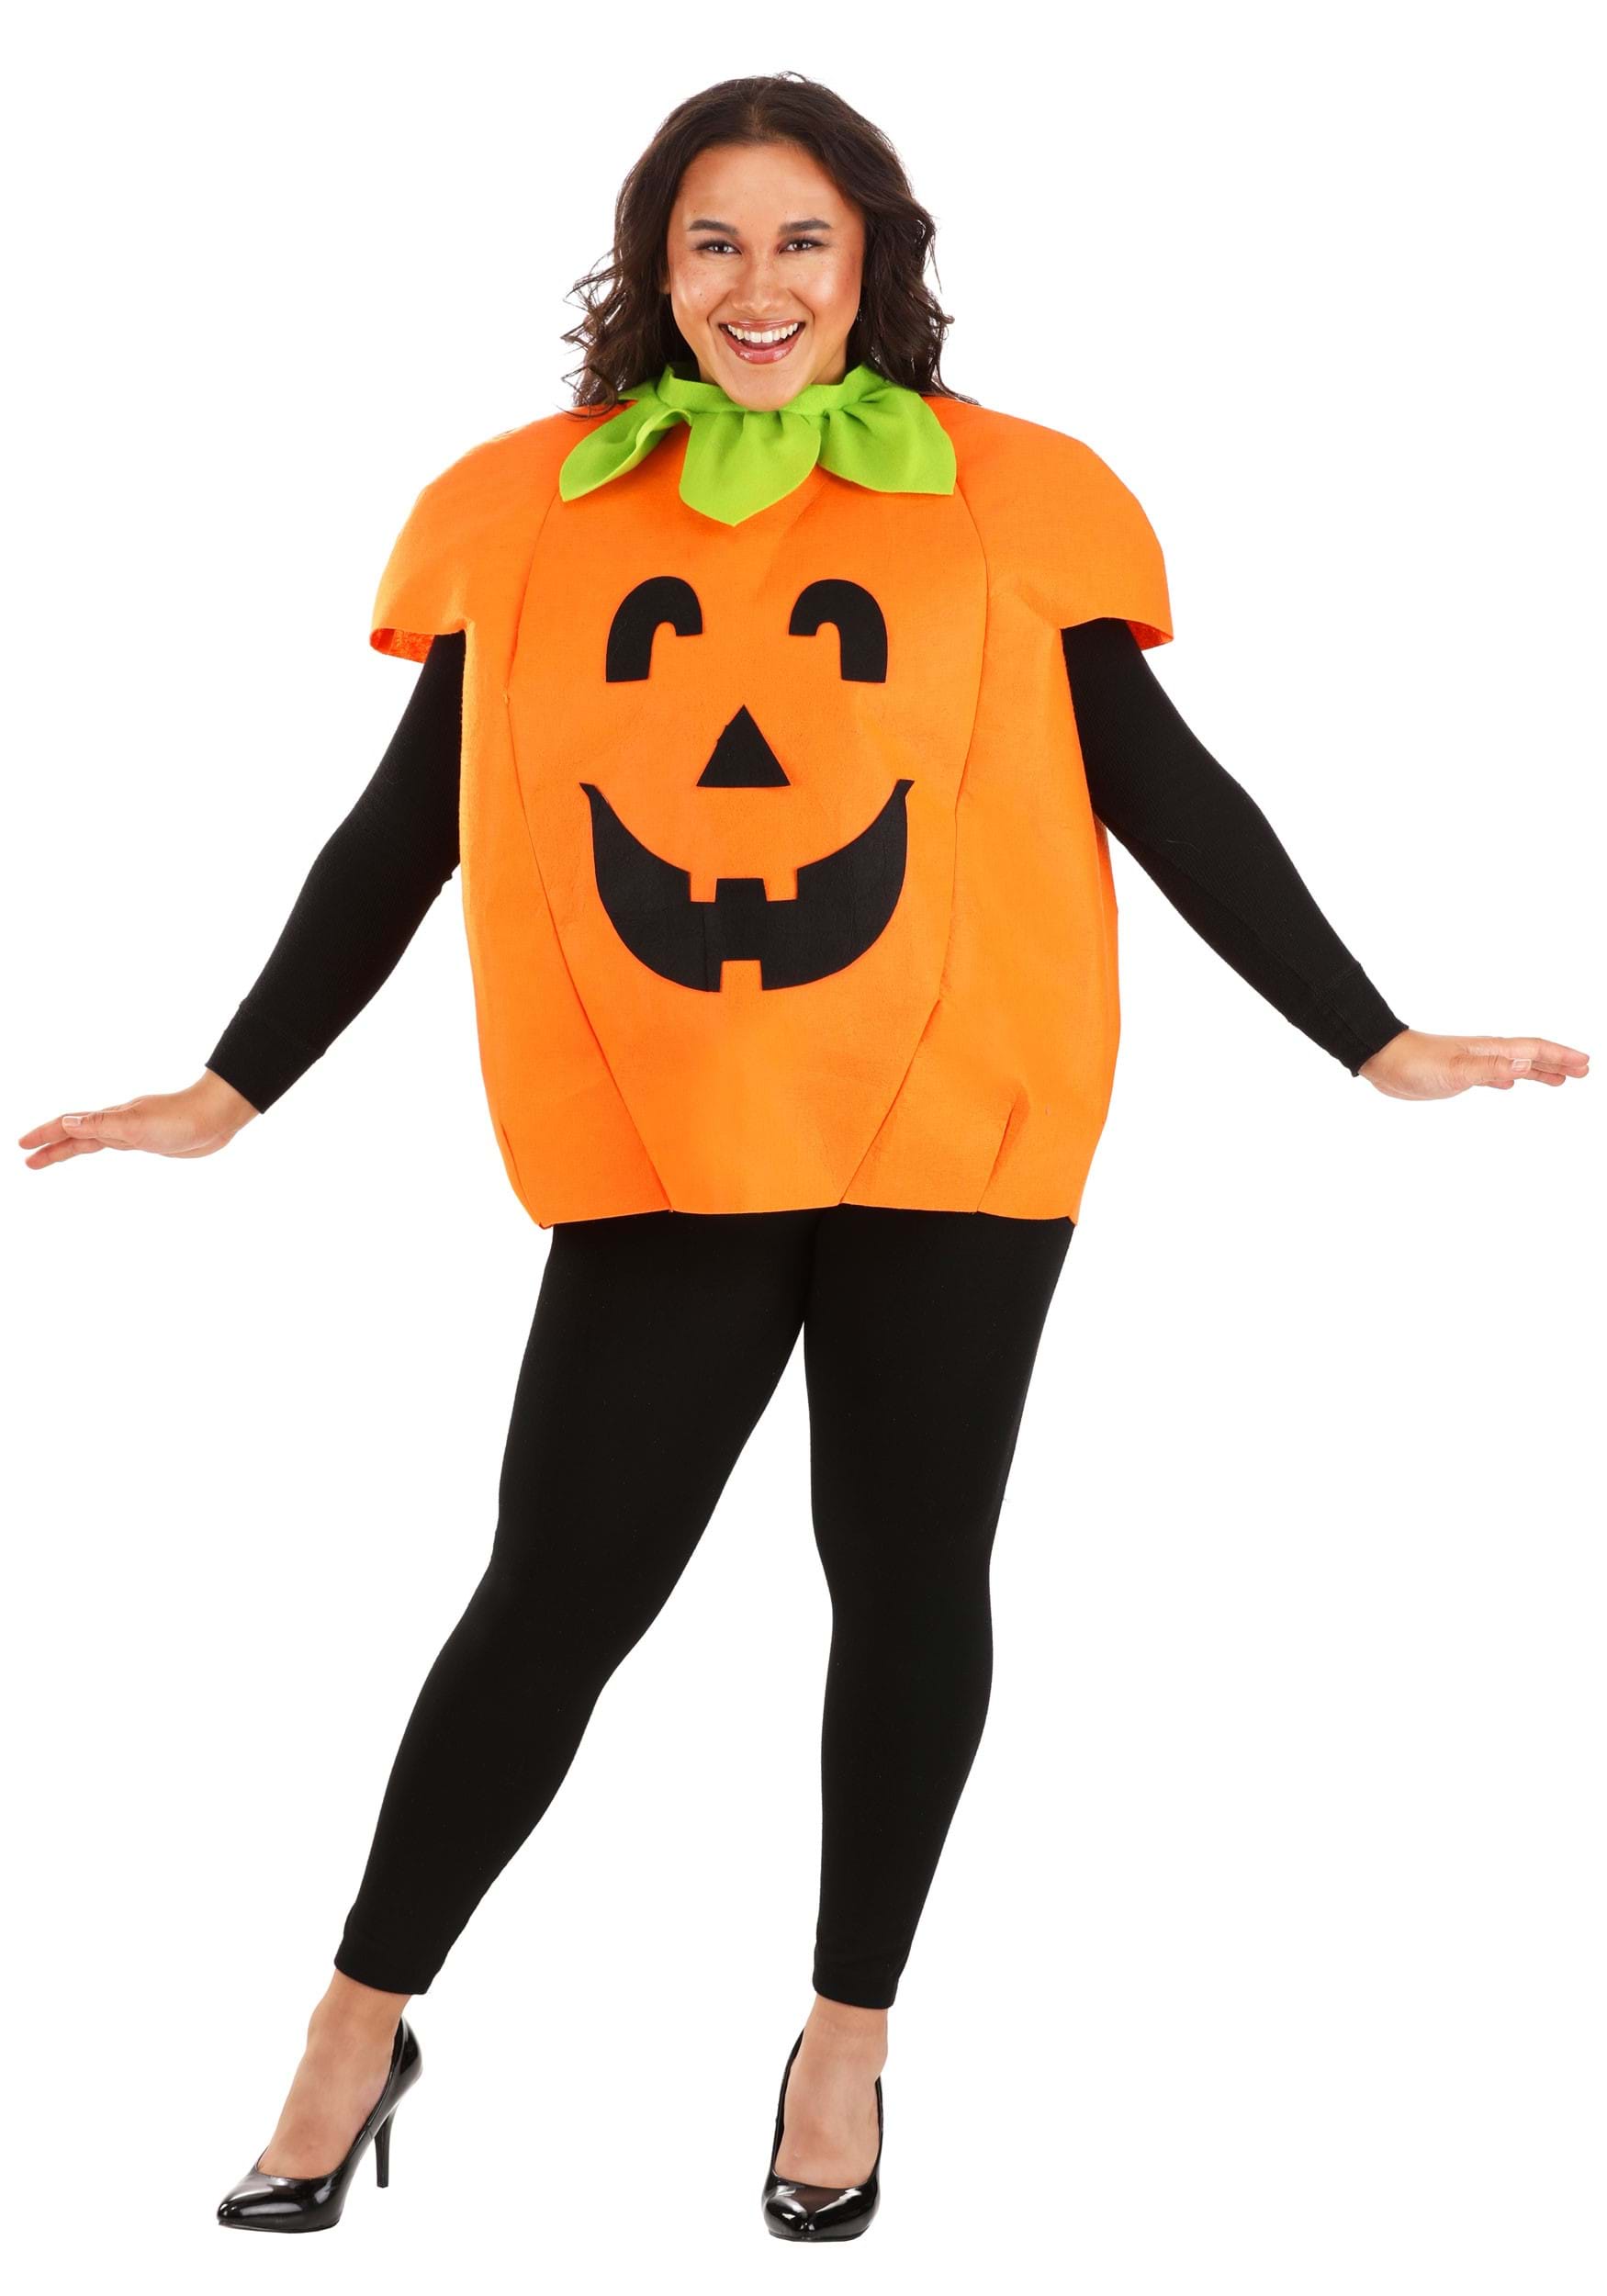 Plus Size Pumpkin Costume For Adults 1X